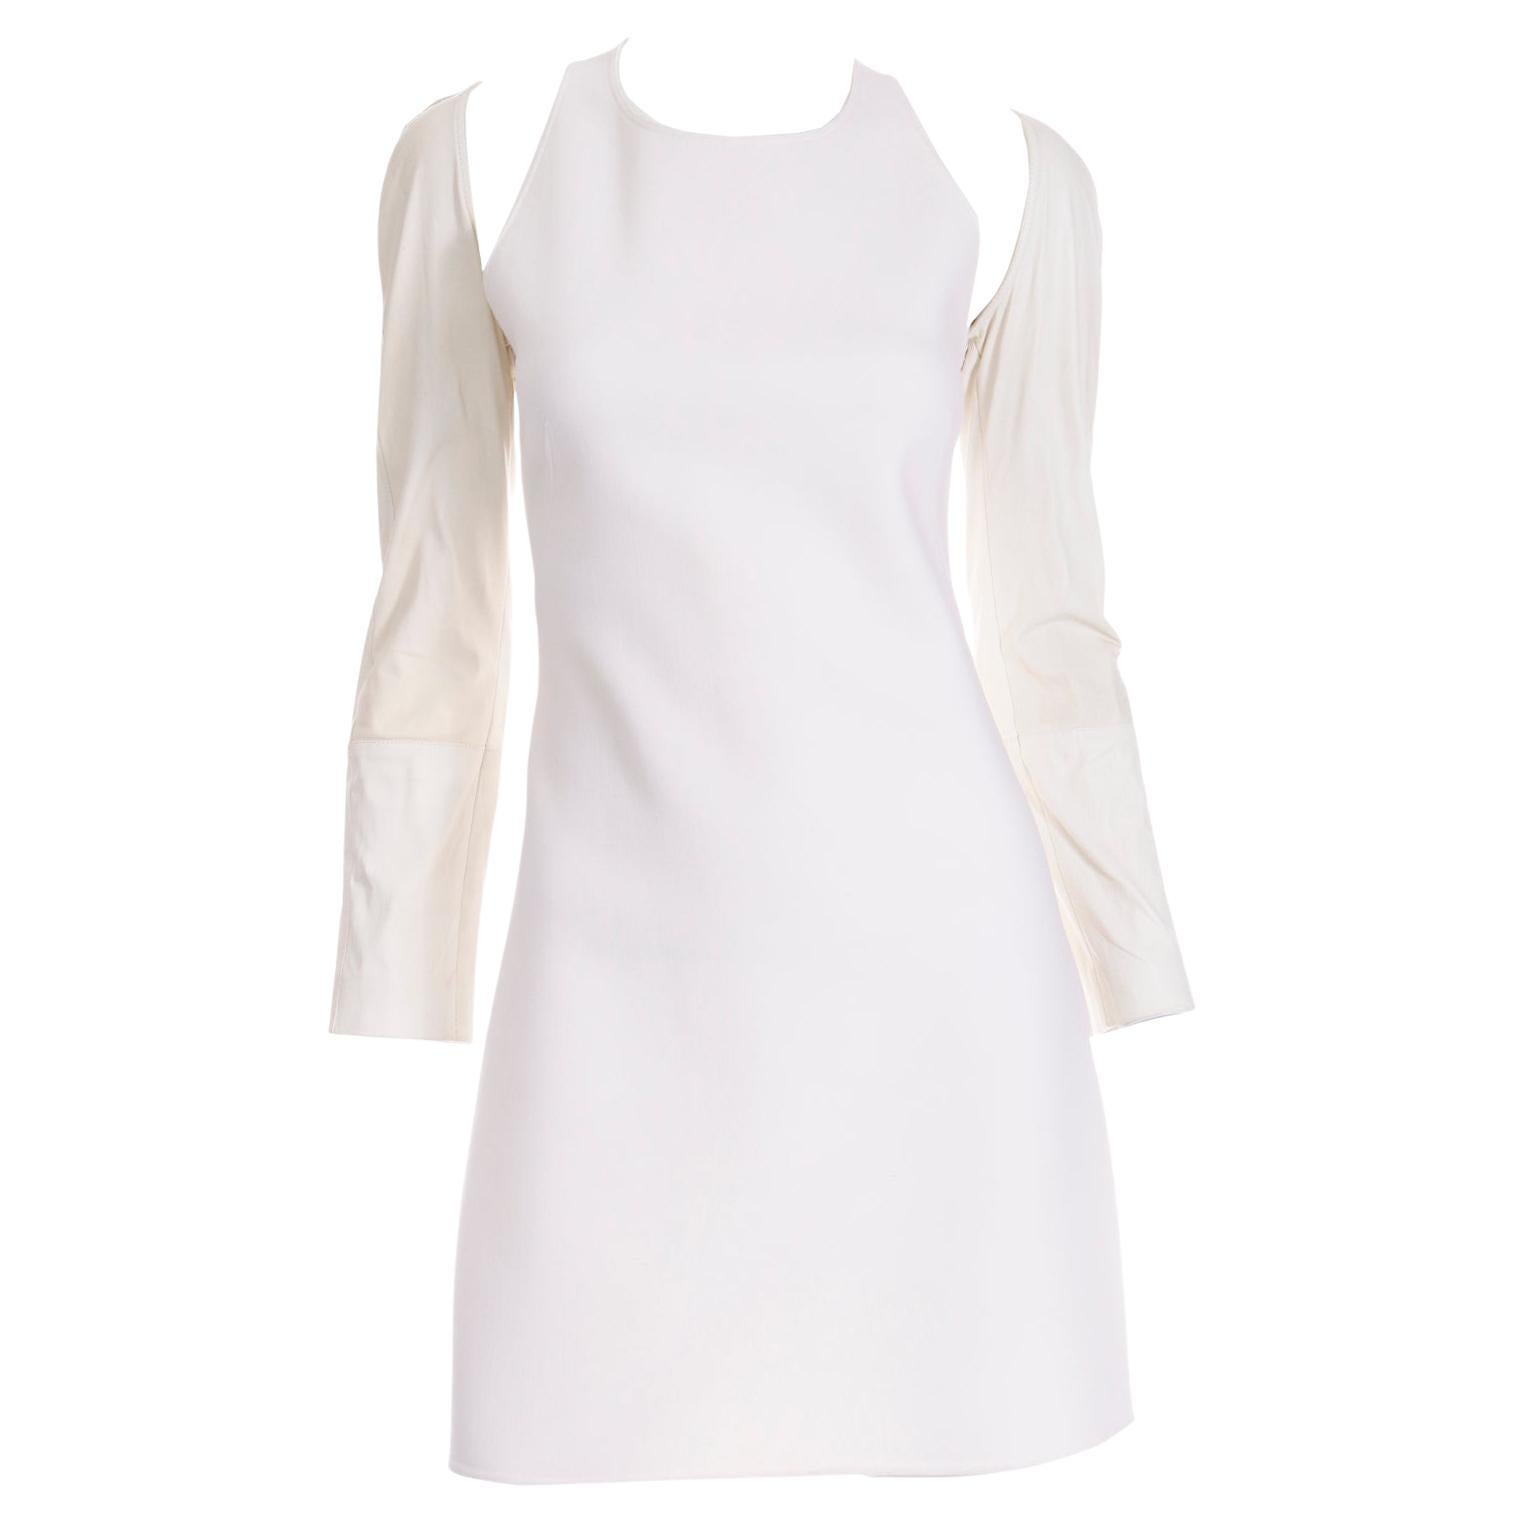 Kaufmanfranco Ivory Crepe Cutout Dress With Cream Lambskin Leather Sleeves For Sale